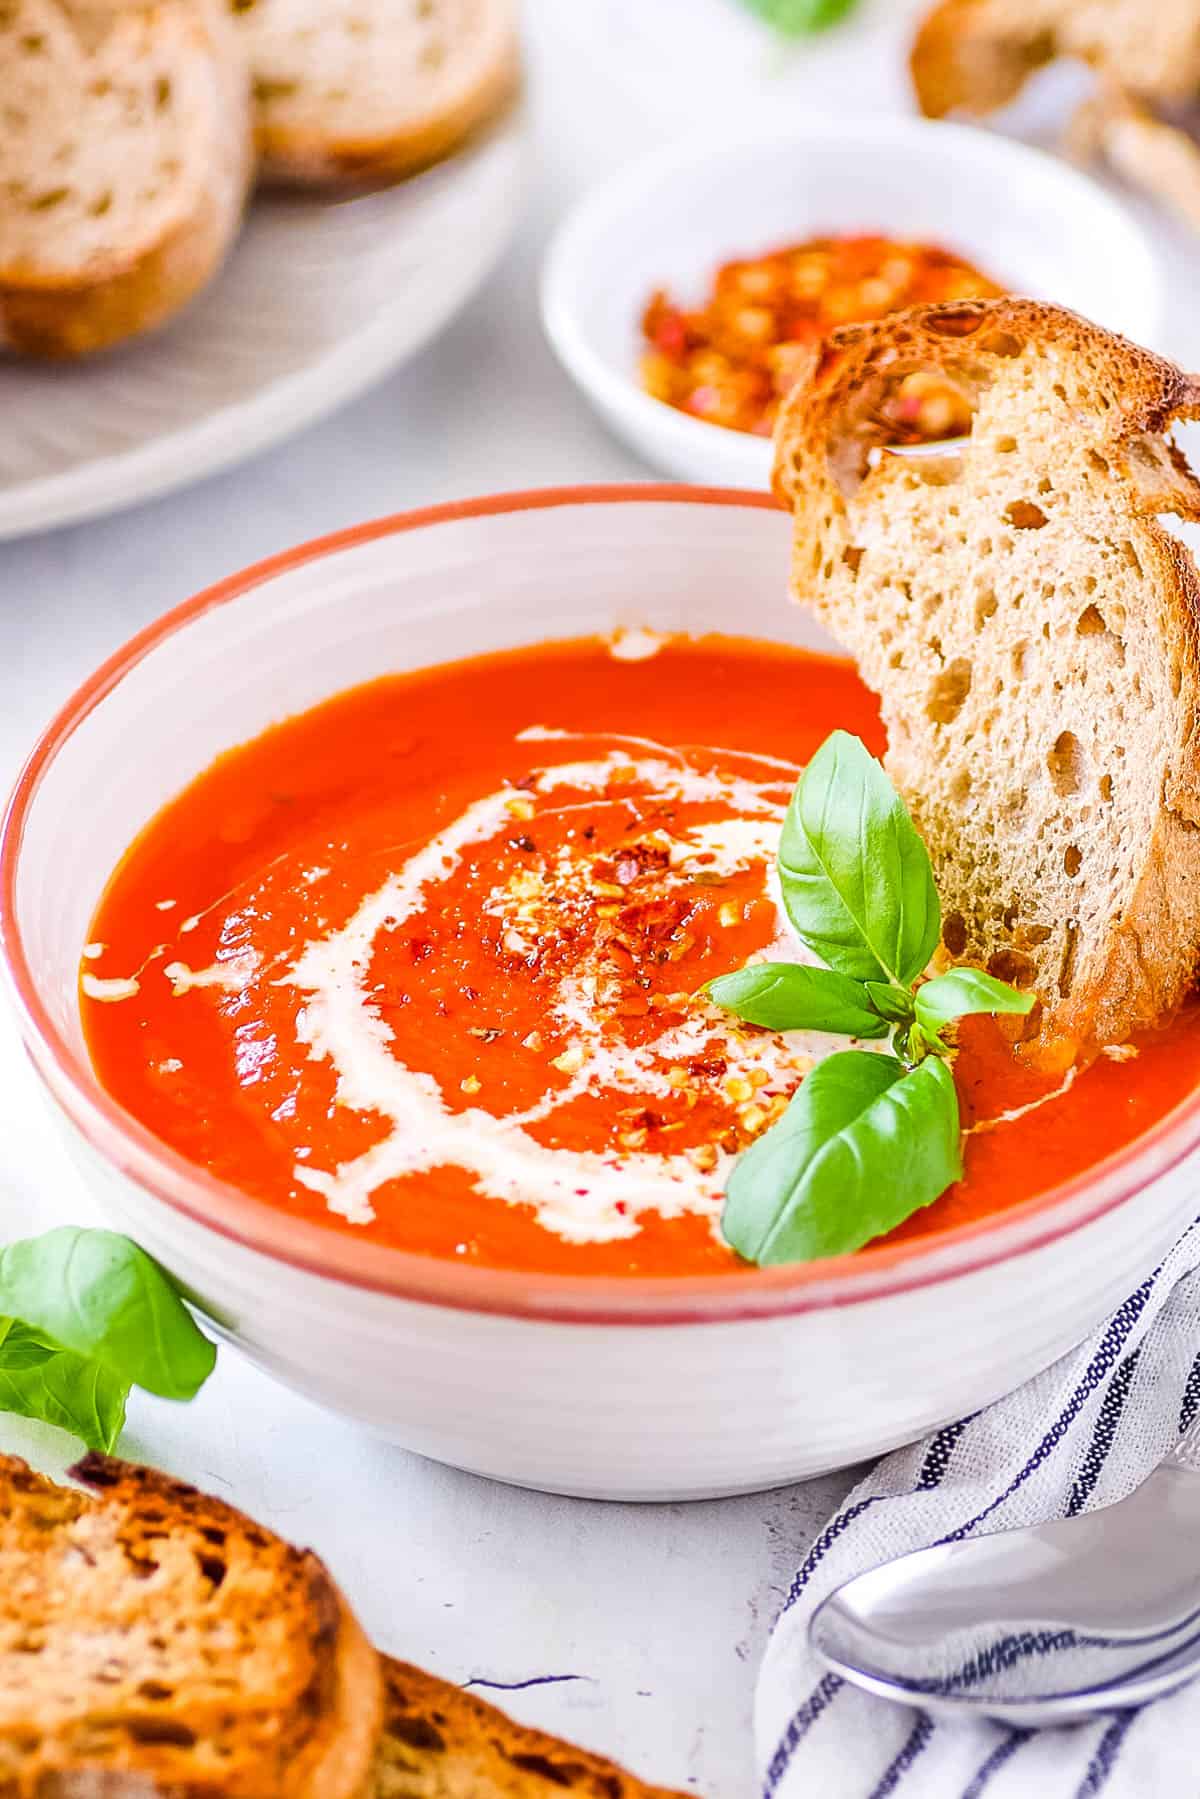 Three ingredient tomato soup with canned tomatoes served in a white bowl with fresh basil and crusty bread as a garnish.